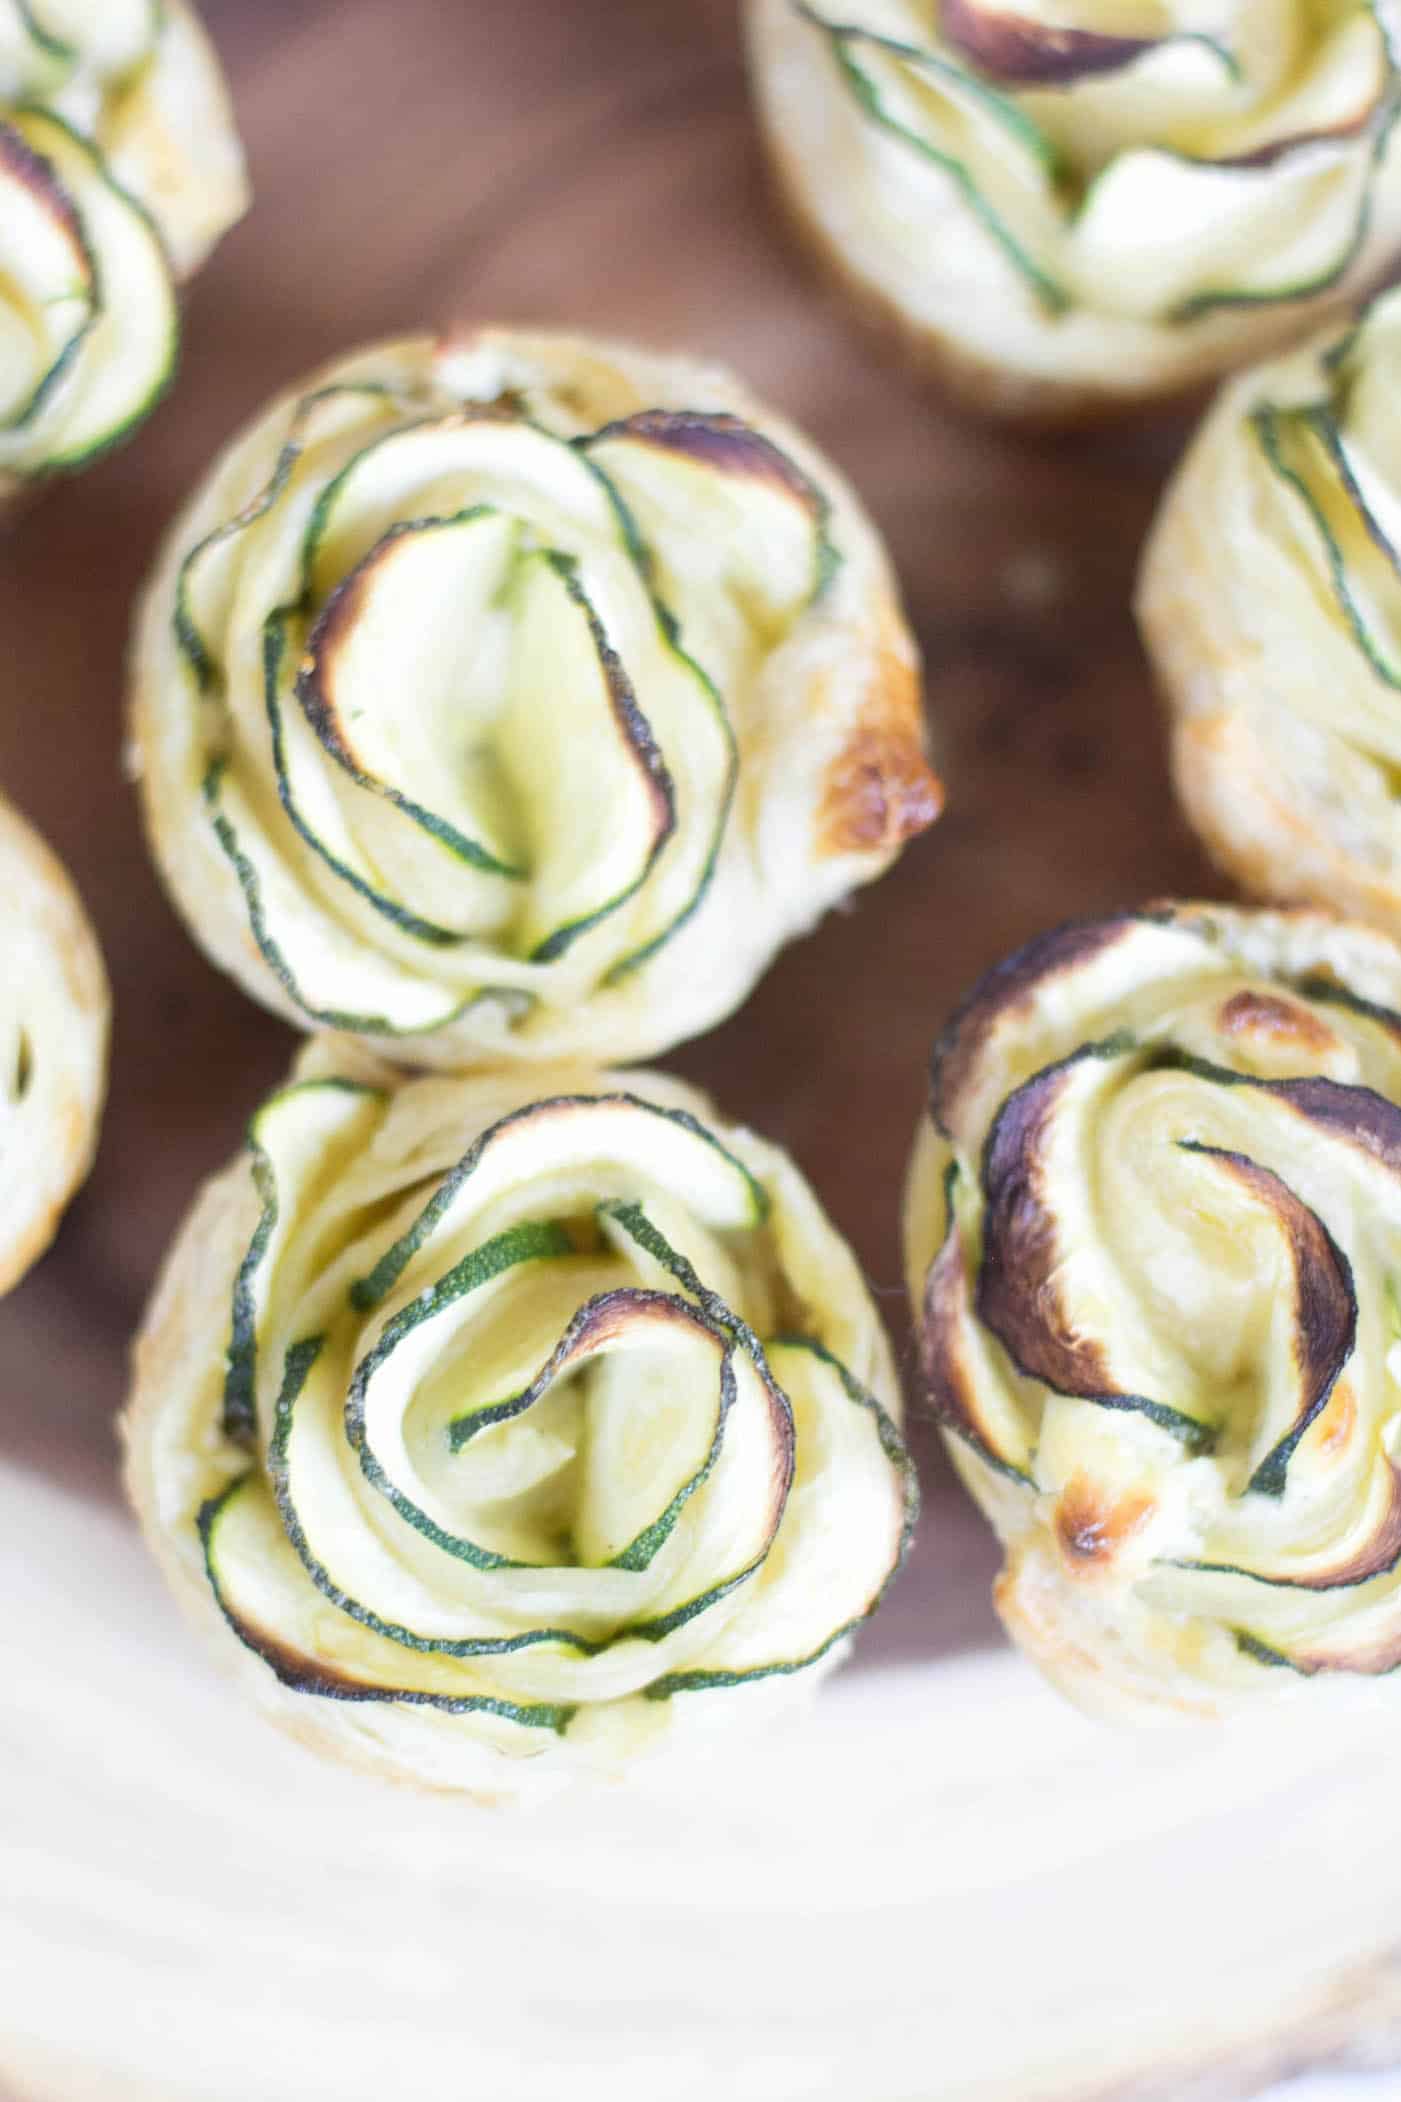 Puff pastry appetizers are easy to make, delicious, and look impressive for holiday dinners and parties. Learn how to make this tasty zucchini version!